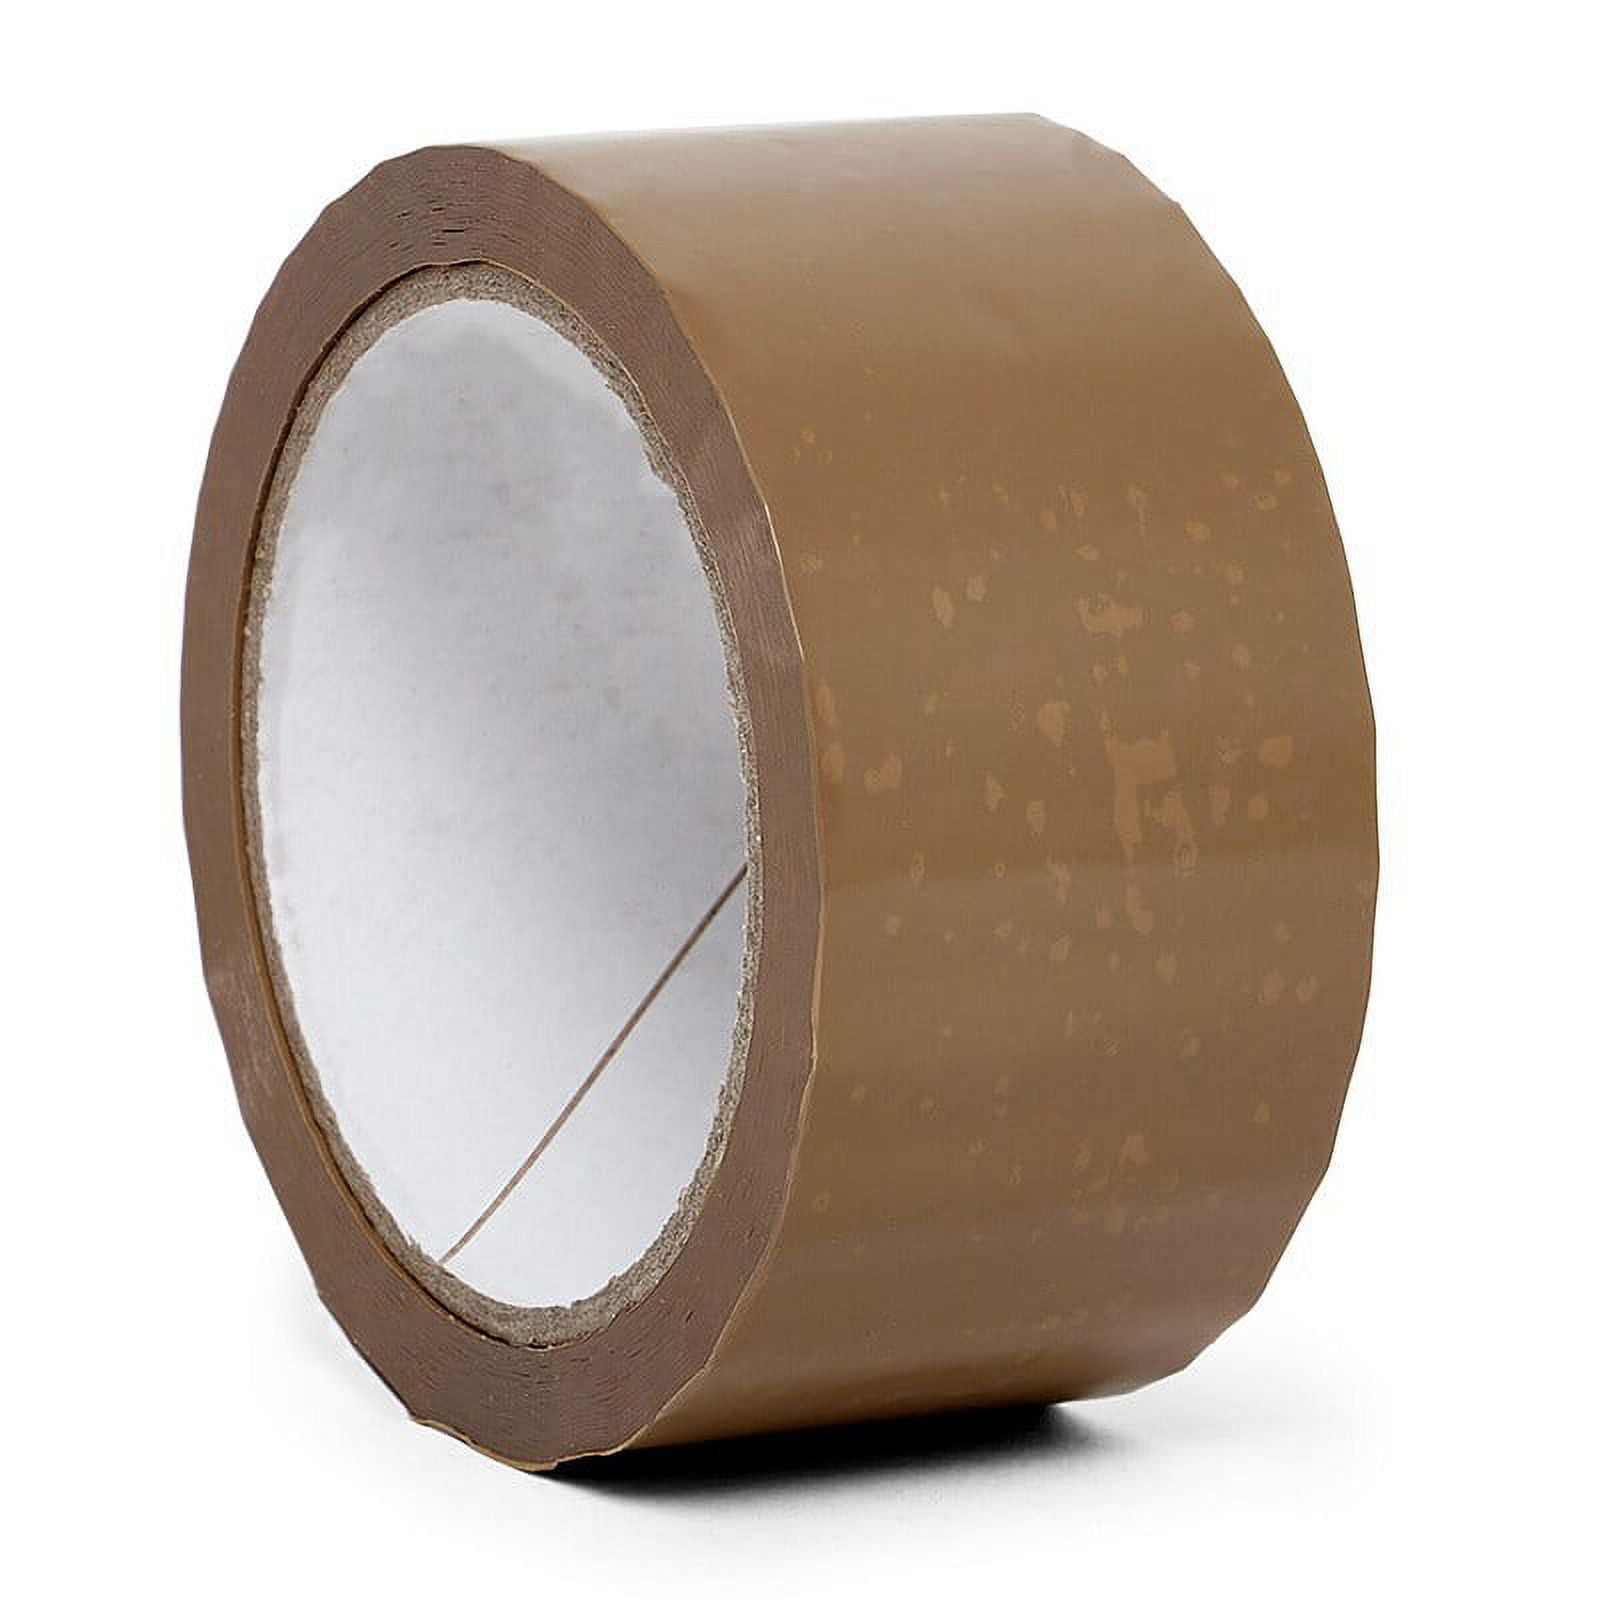 Clear Carton Sealing Tape, Economy, 2 x 55 yds., 3 Mil Thick for $4.71  Online